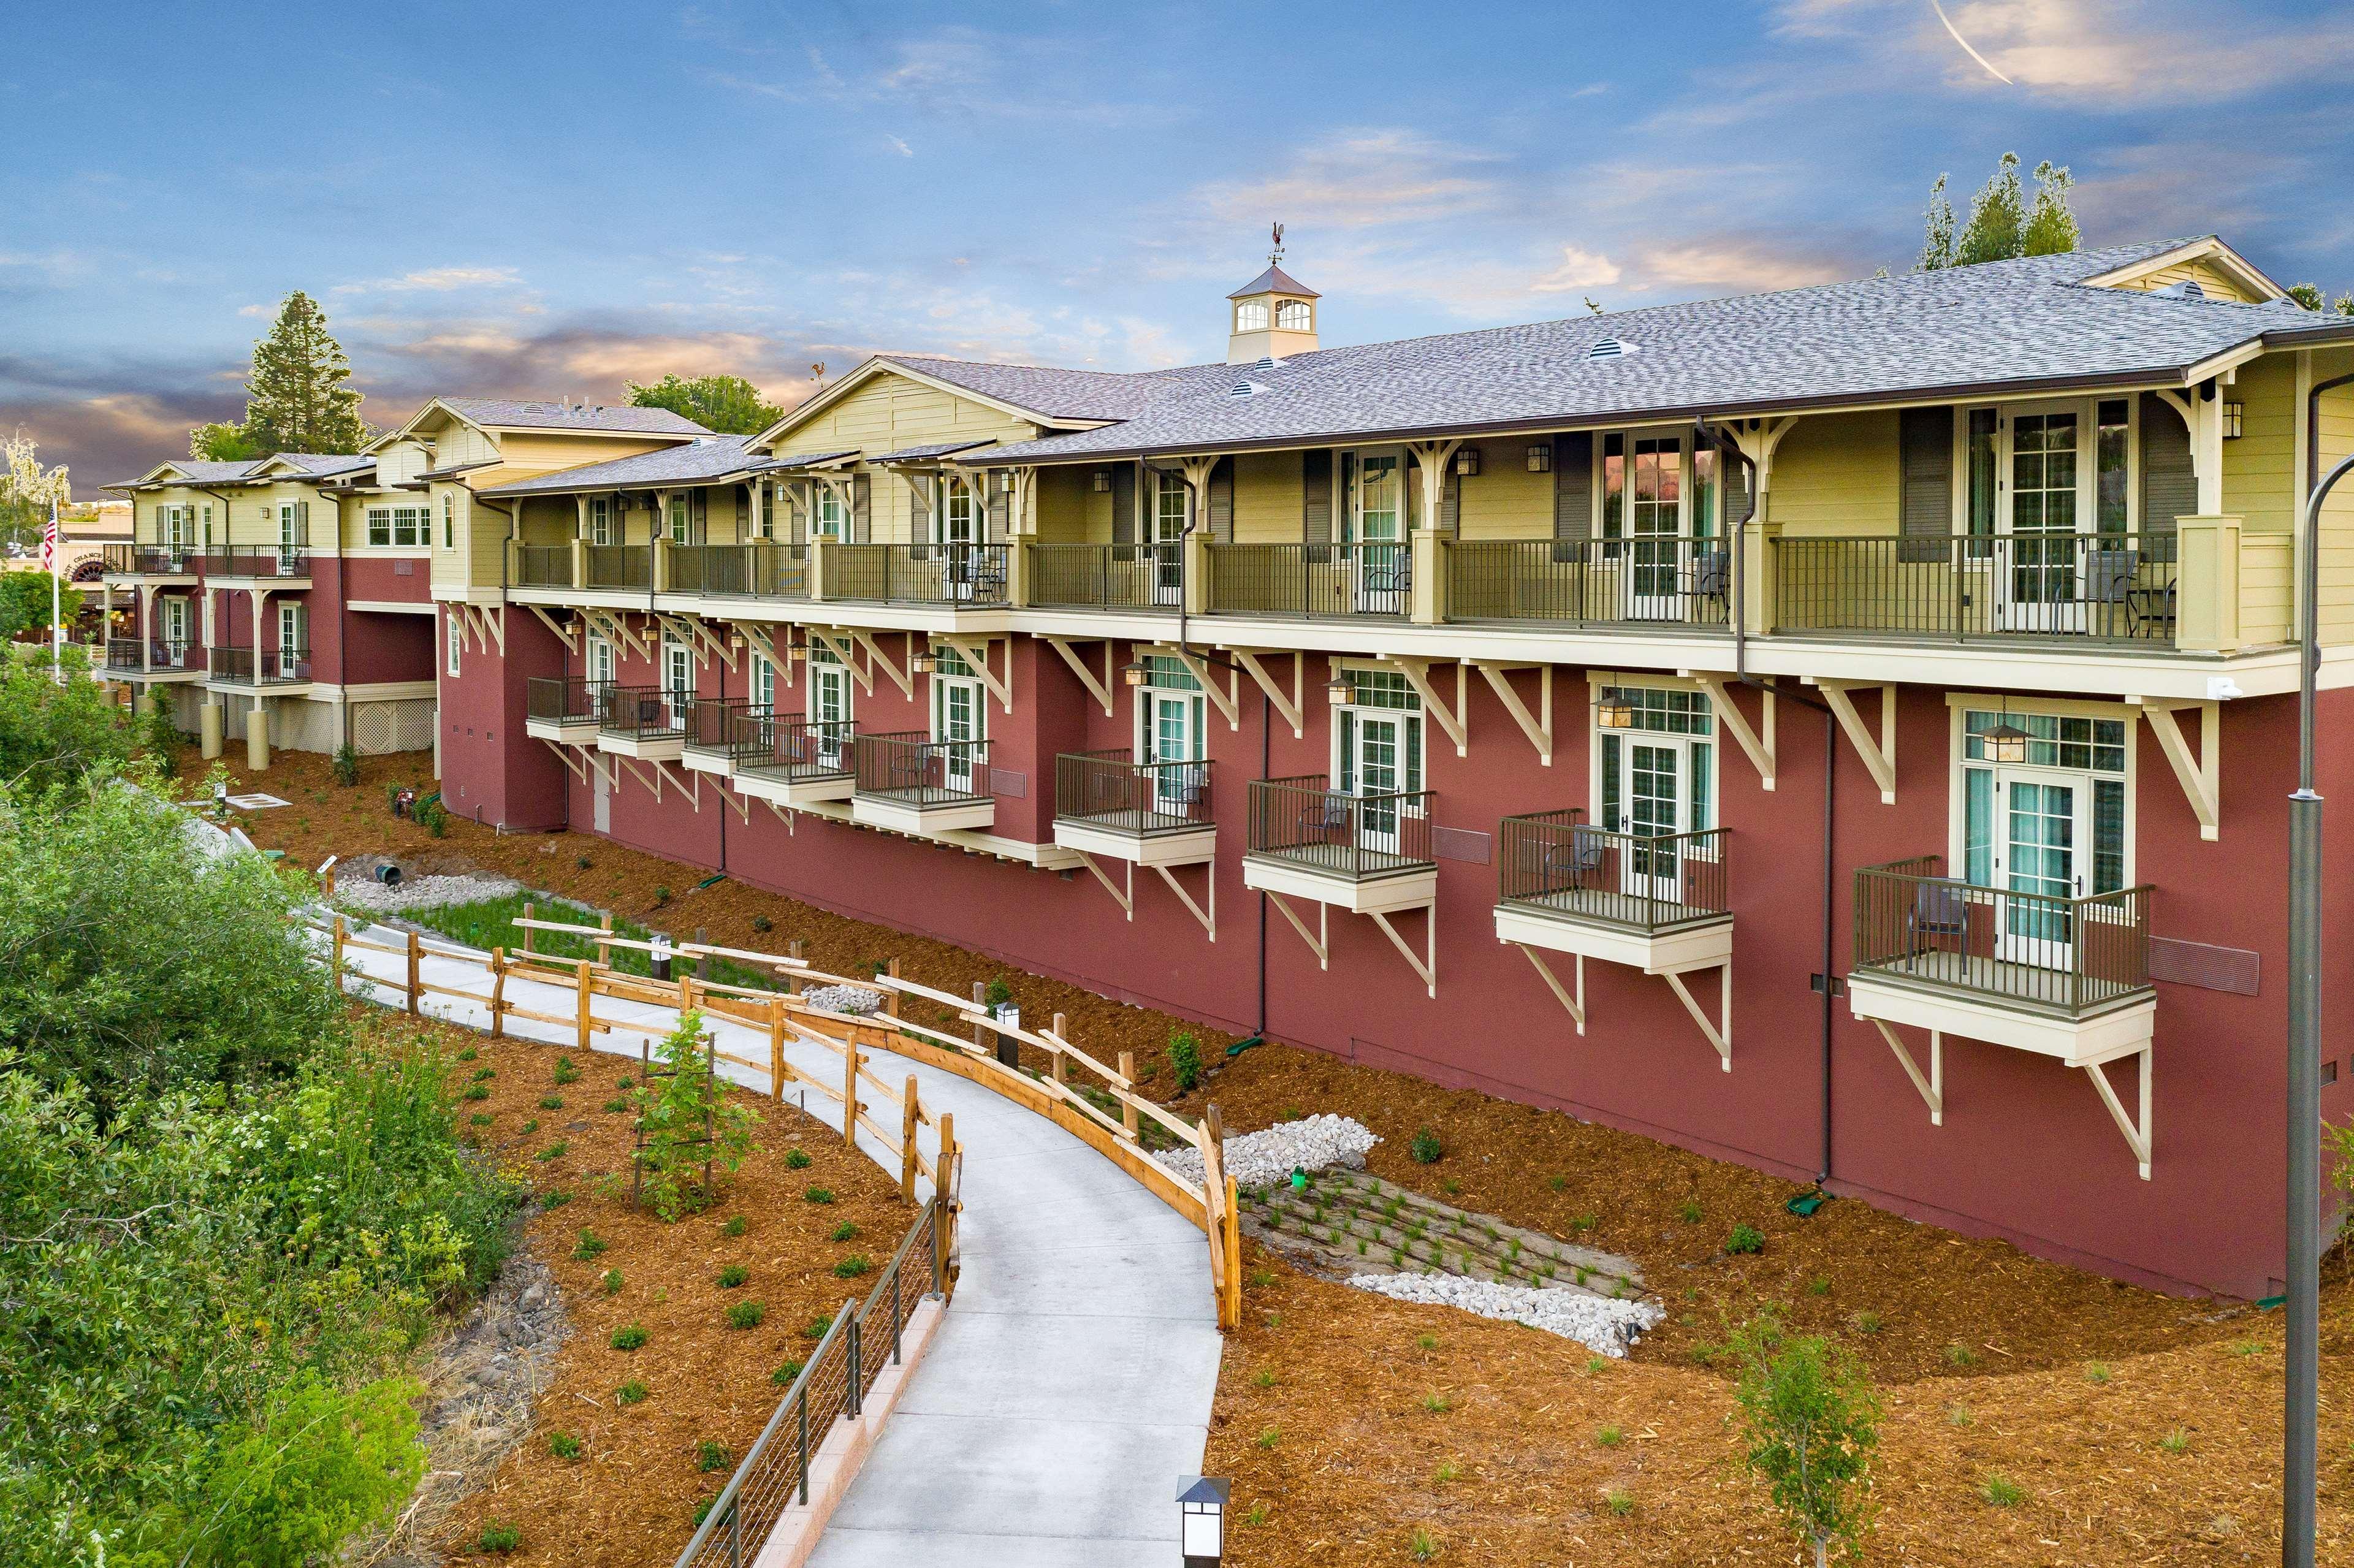 The Agrarian Hotel; Best Western Signature Collection Arroyo Grande Exterior photo